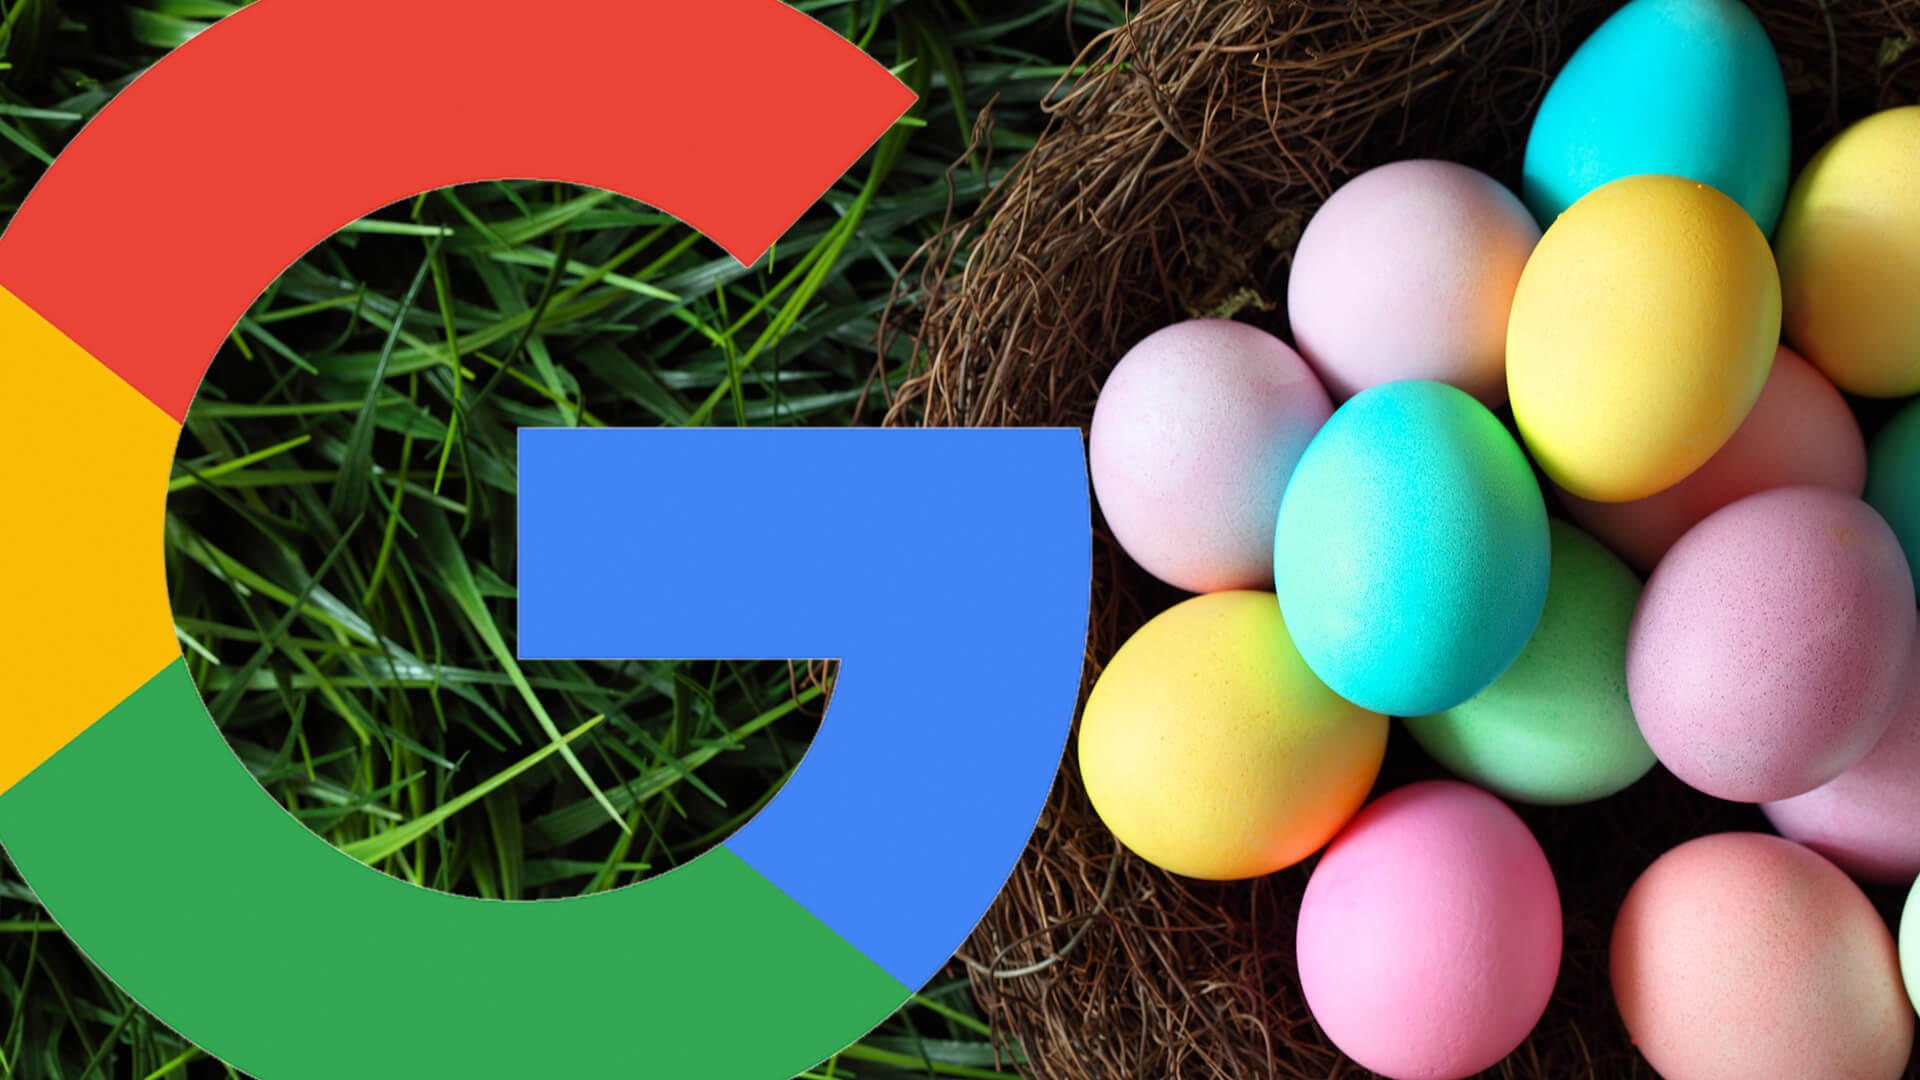 Updated The big list of Google Easter eggs